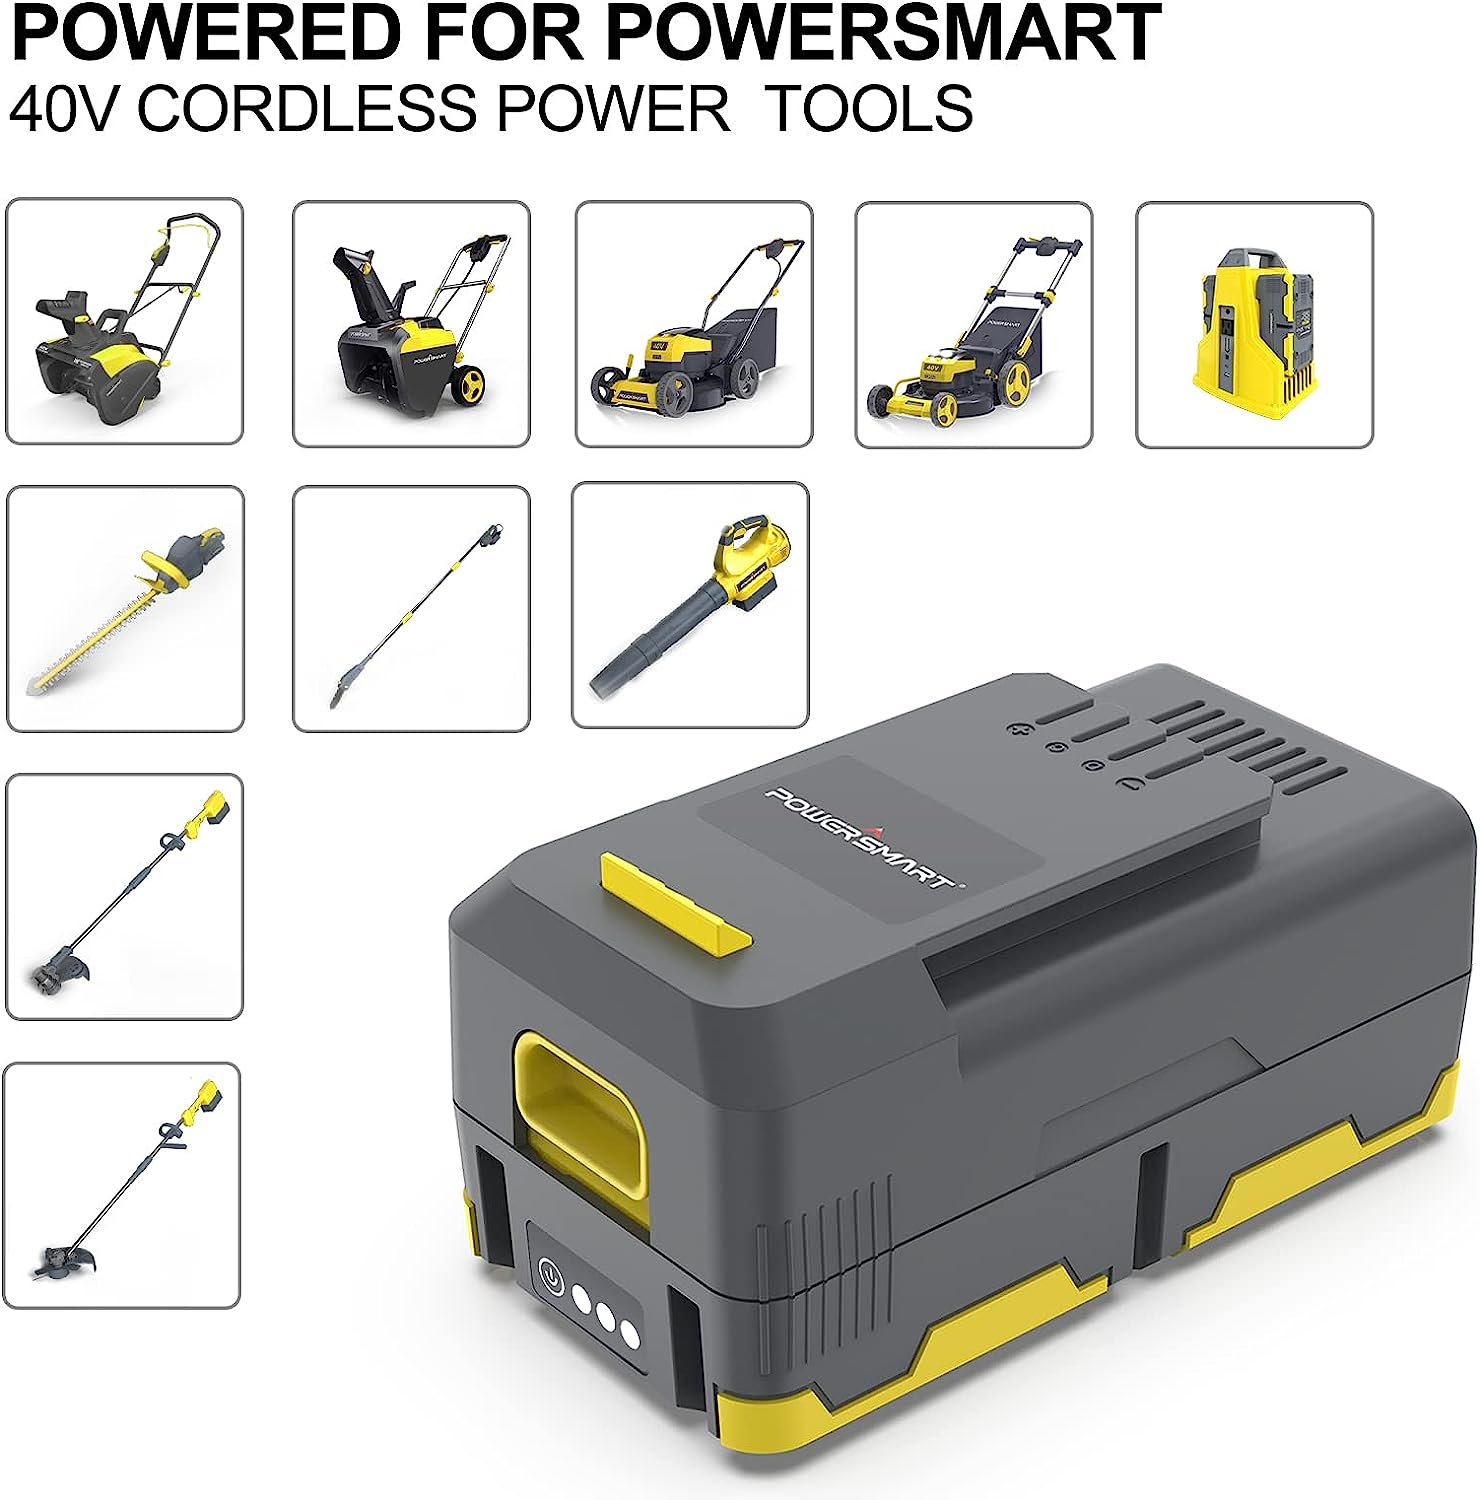 Powersmart DB9801 Power Inverter Battery and Charger 300W New